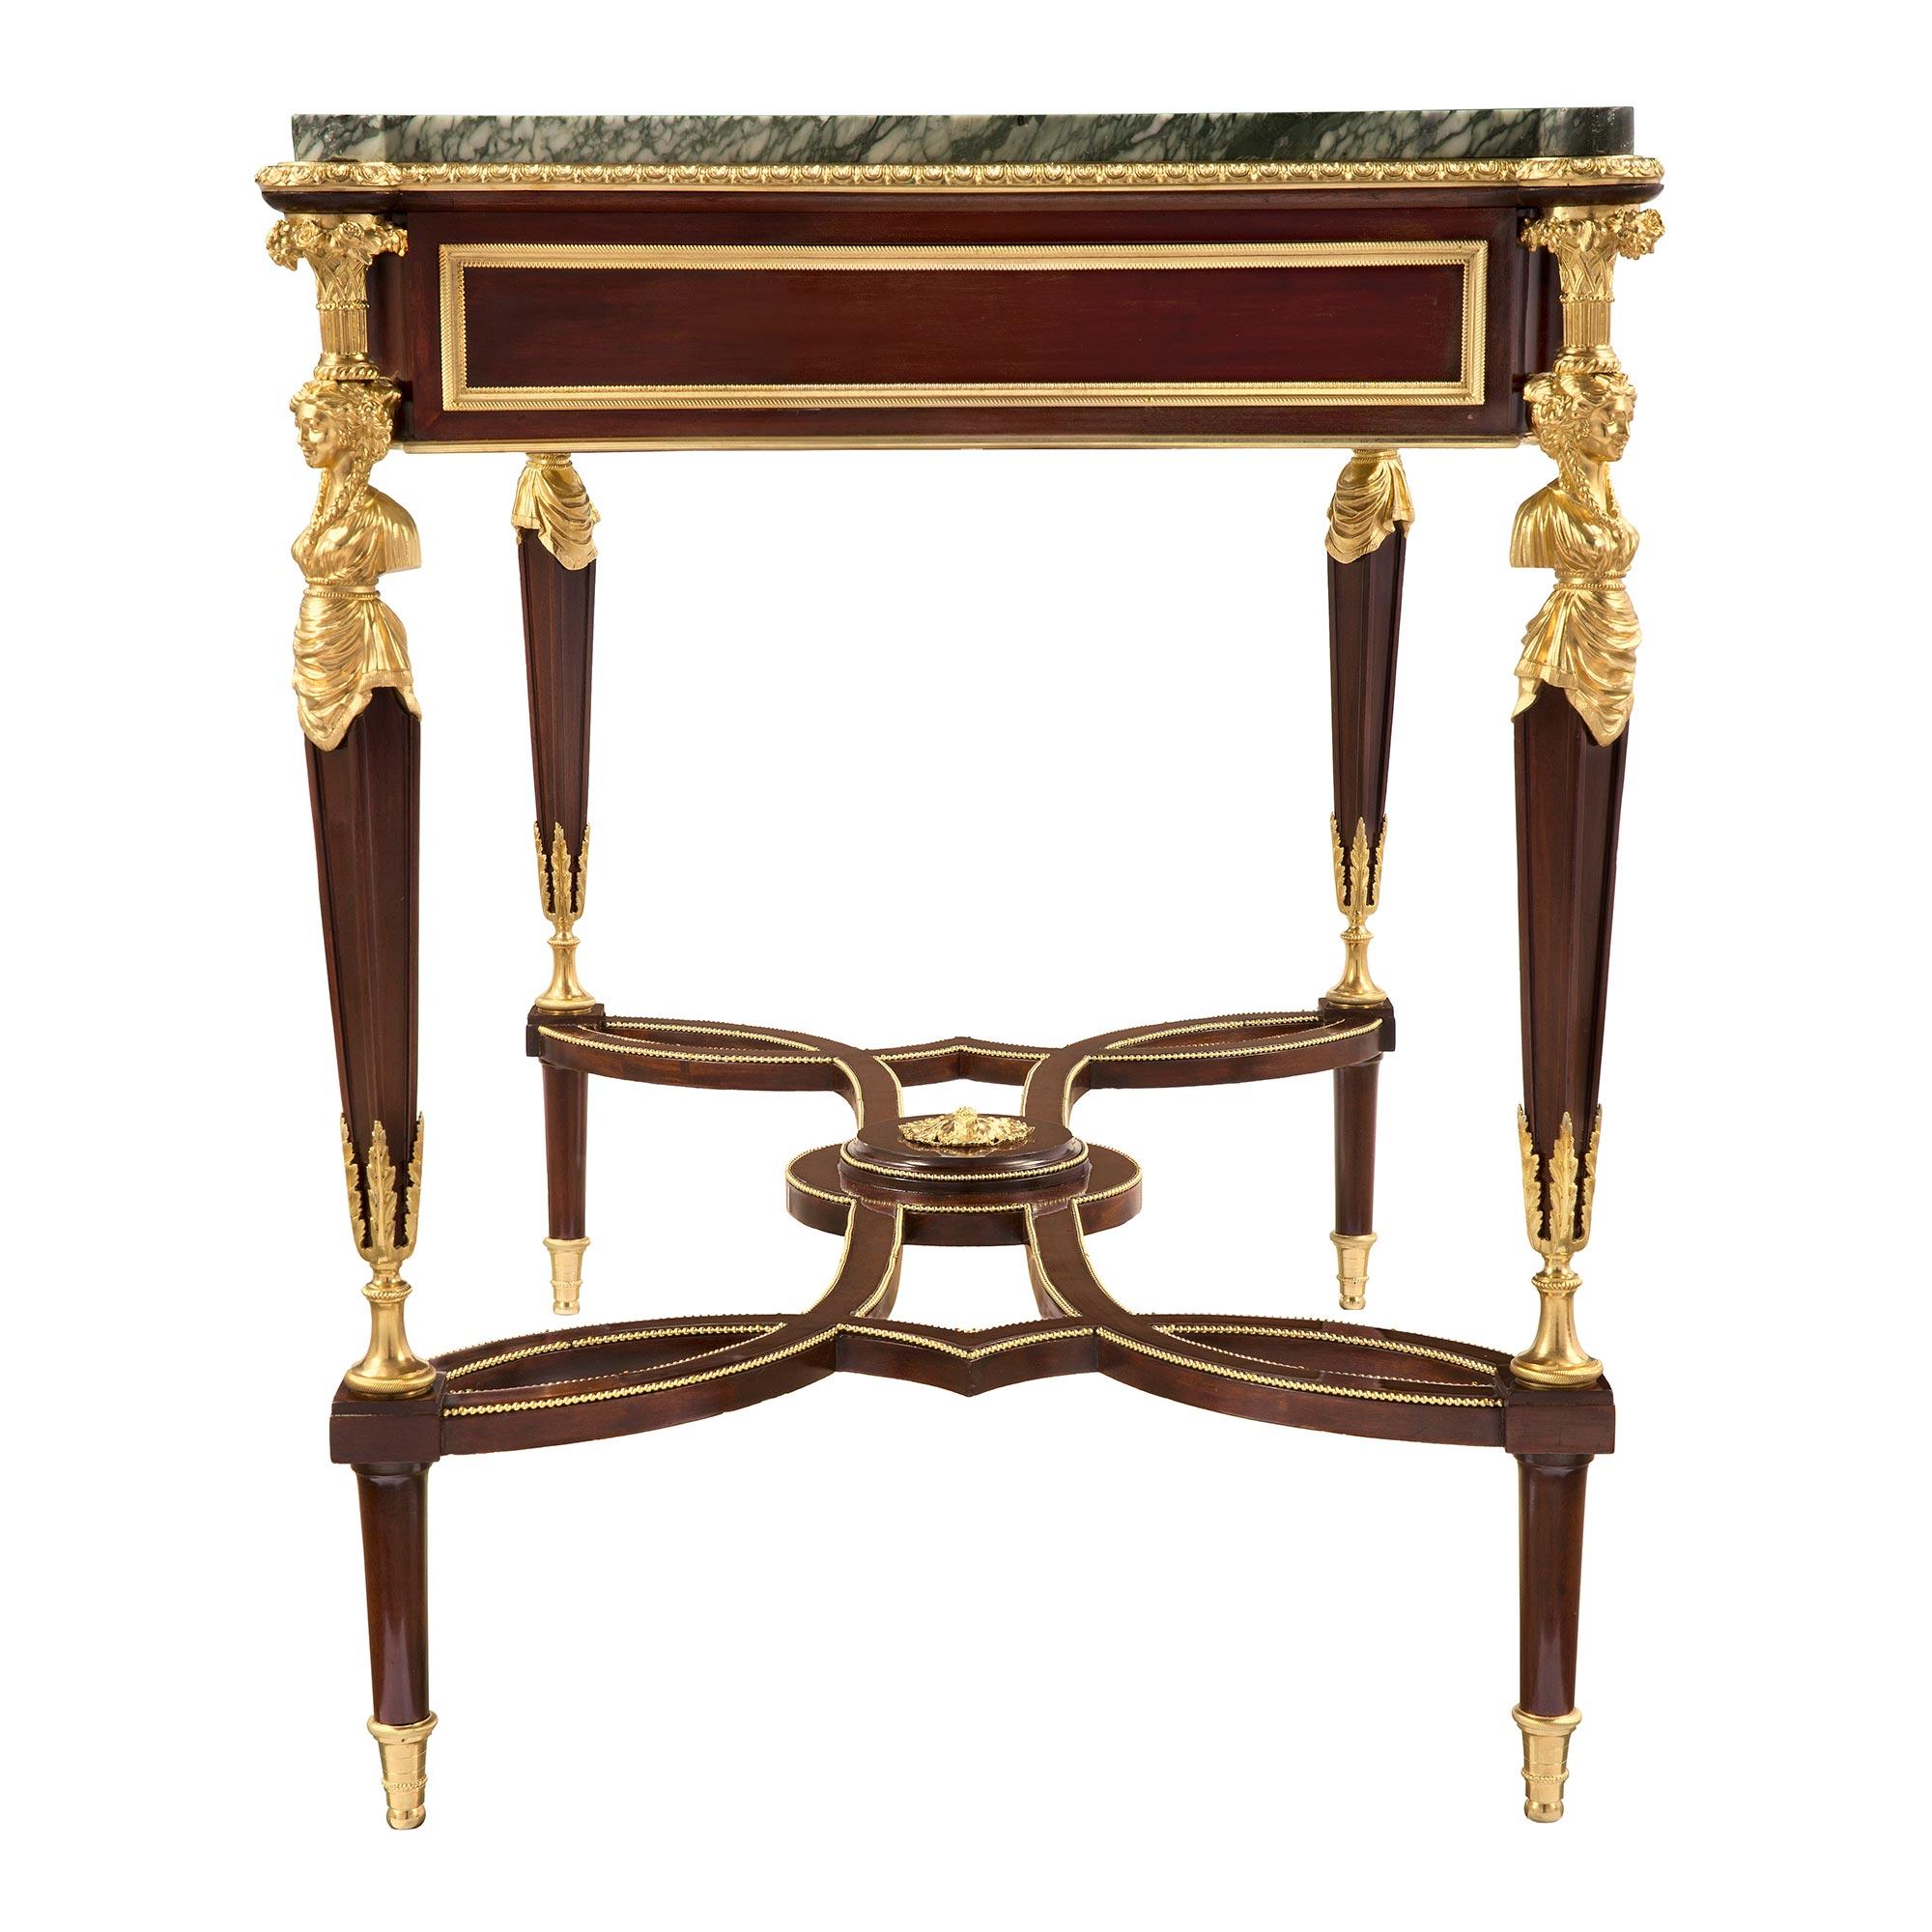 French 19th Century Mahogany, Ormolu and Marble Table, Attributed to Dasson In Good Condition For Sale In West Palm Beach, FL